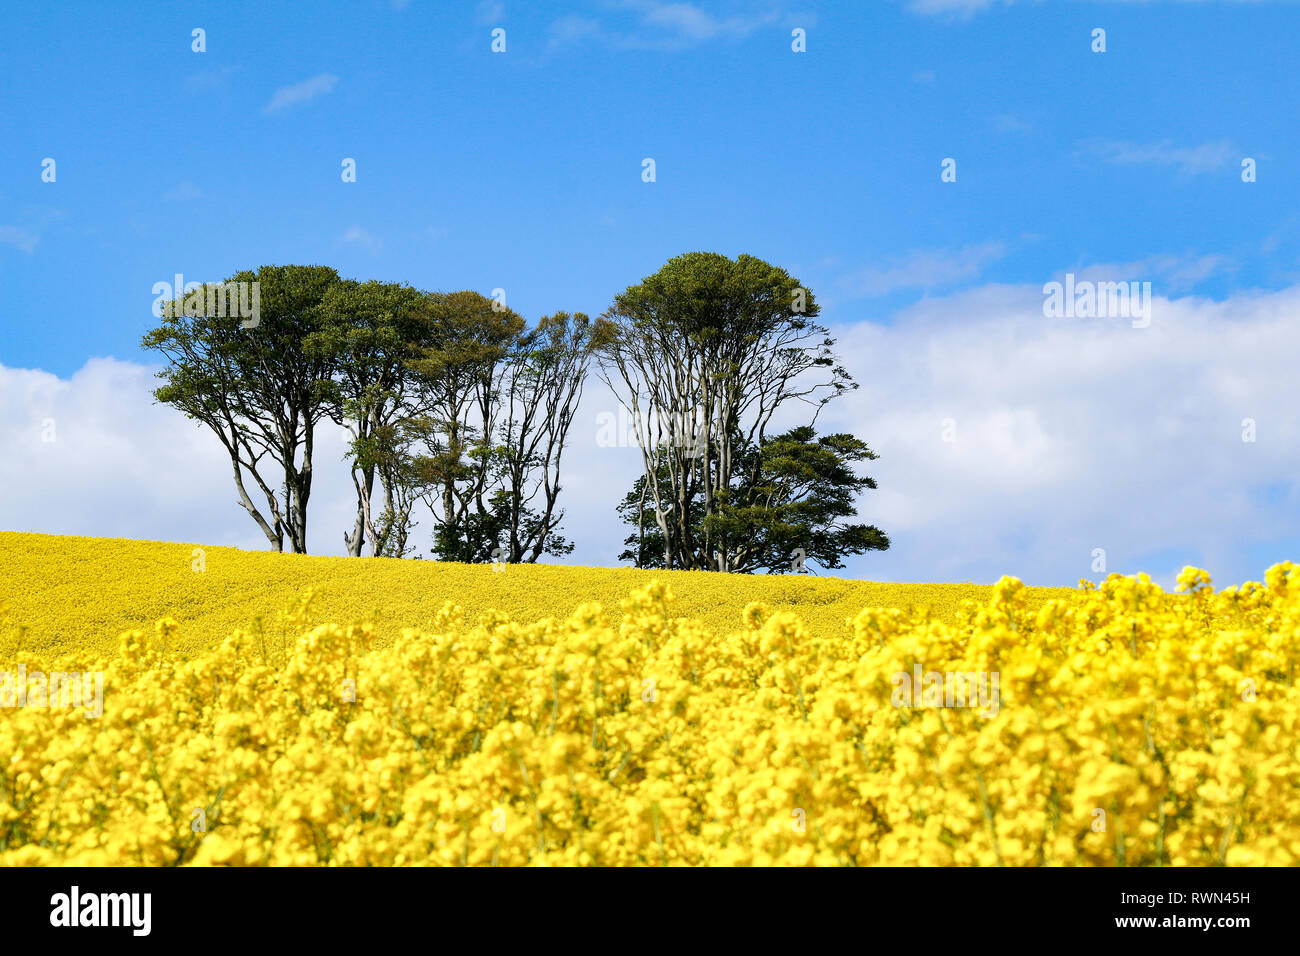 Small clump of trees in field of bright yellow flowers of Rapeseed (Brassica napus) on sunny summer day under a blue sky Stock Photo